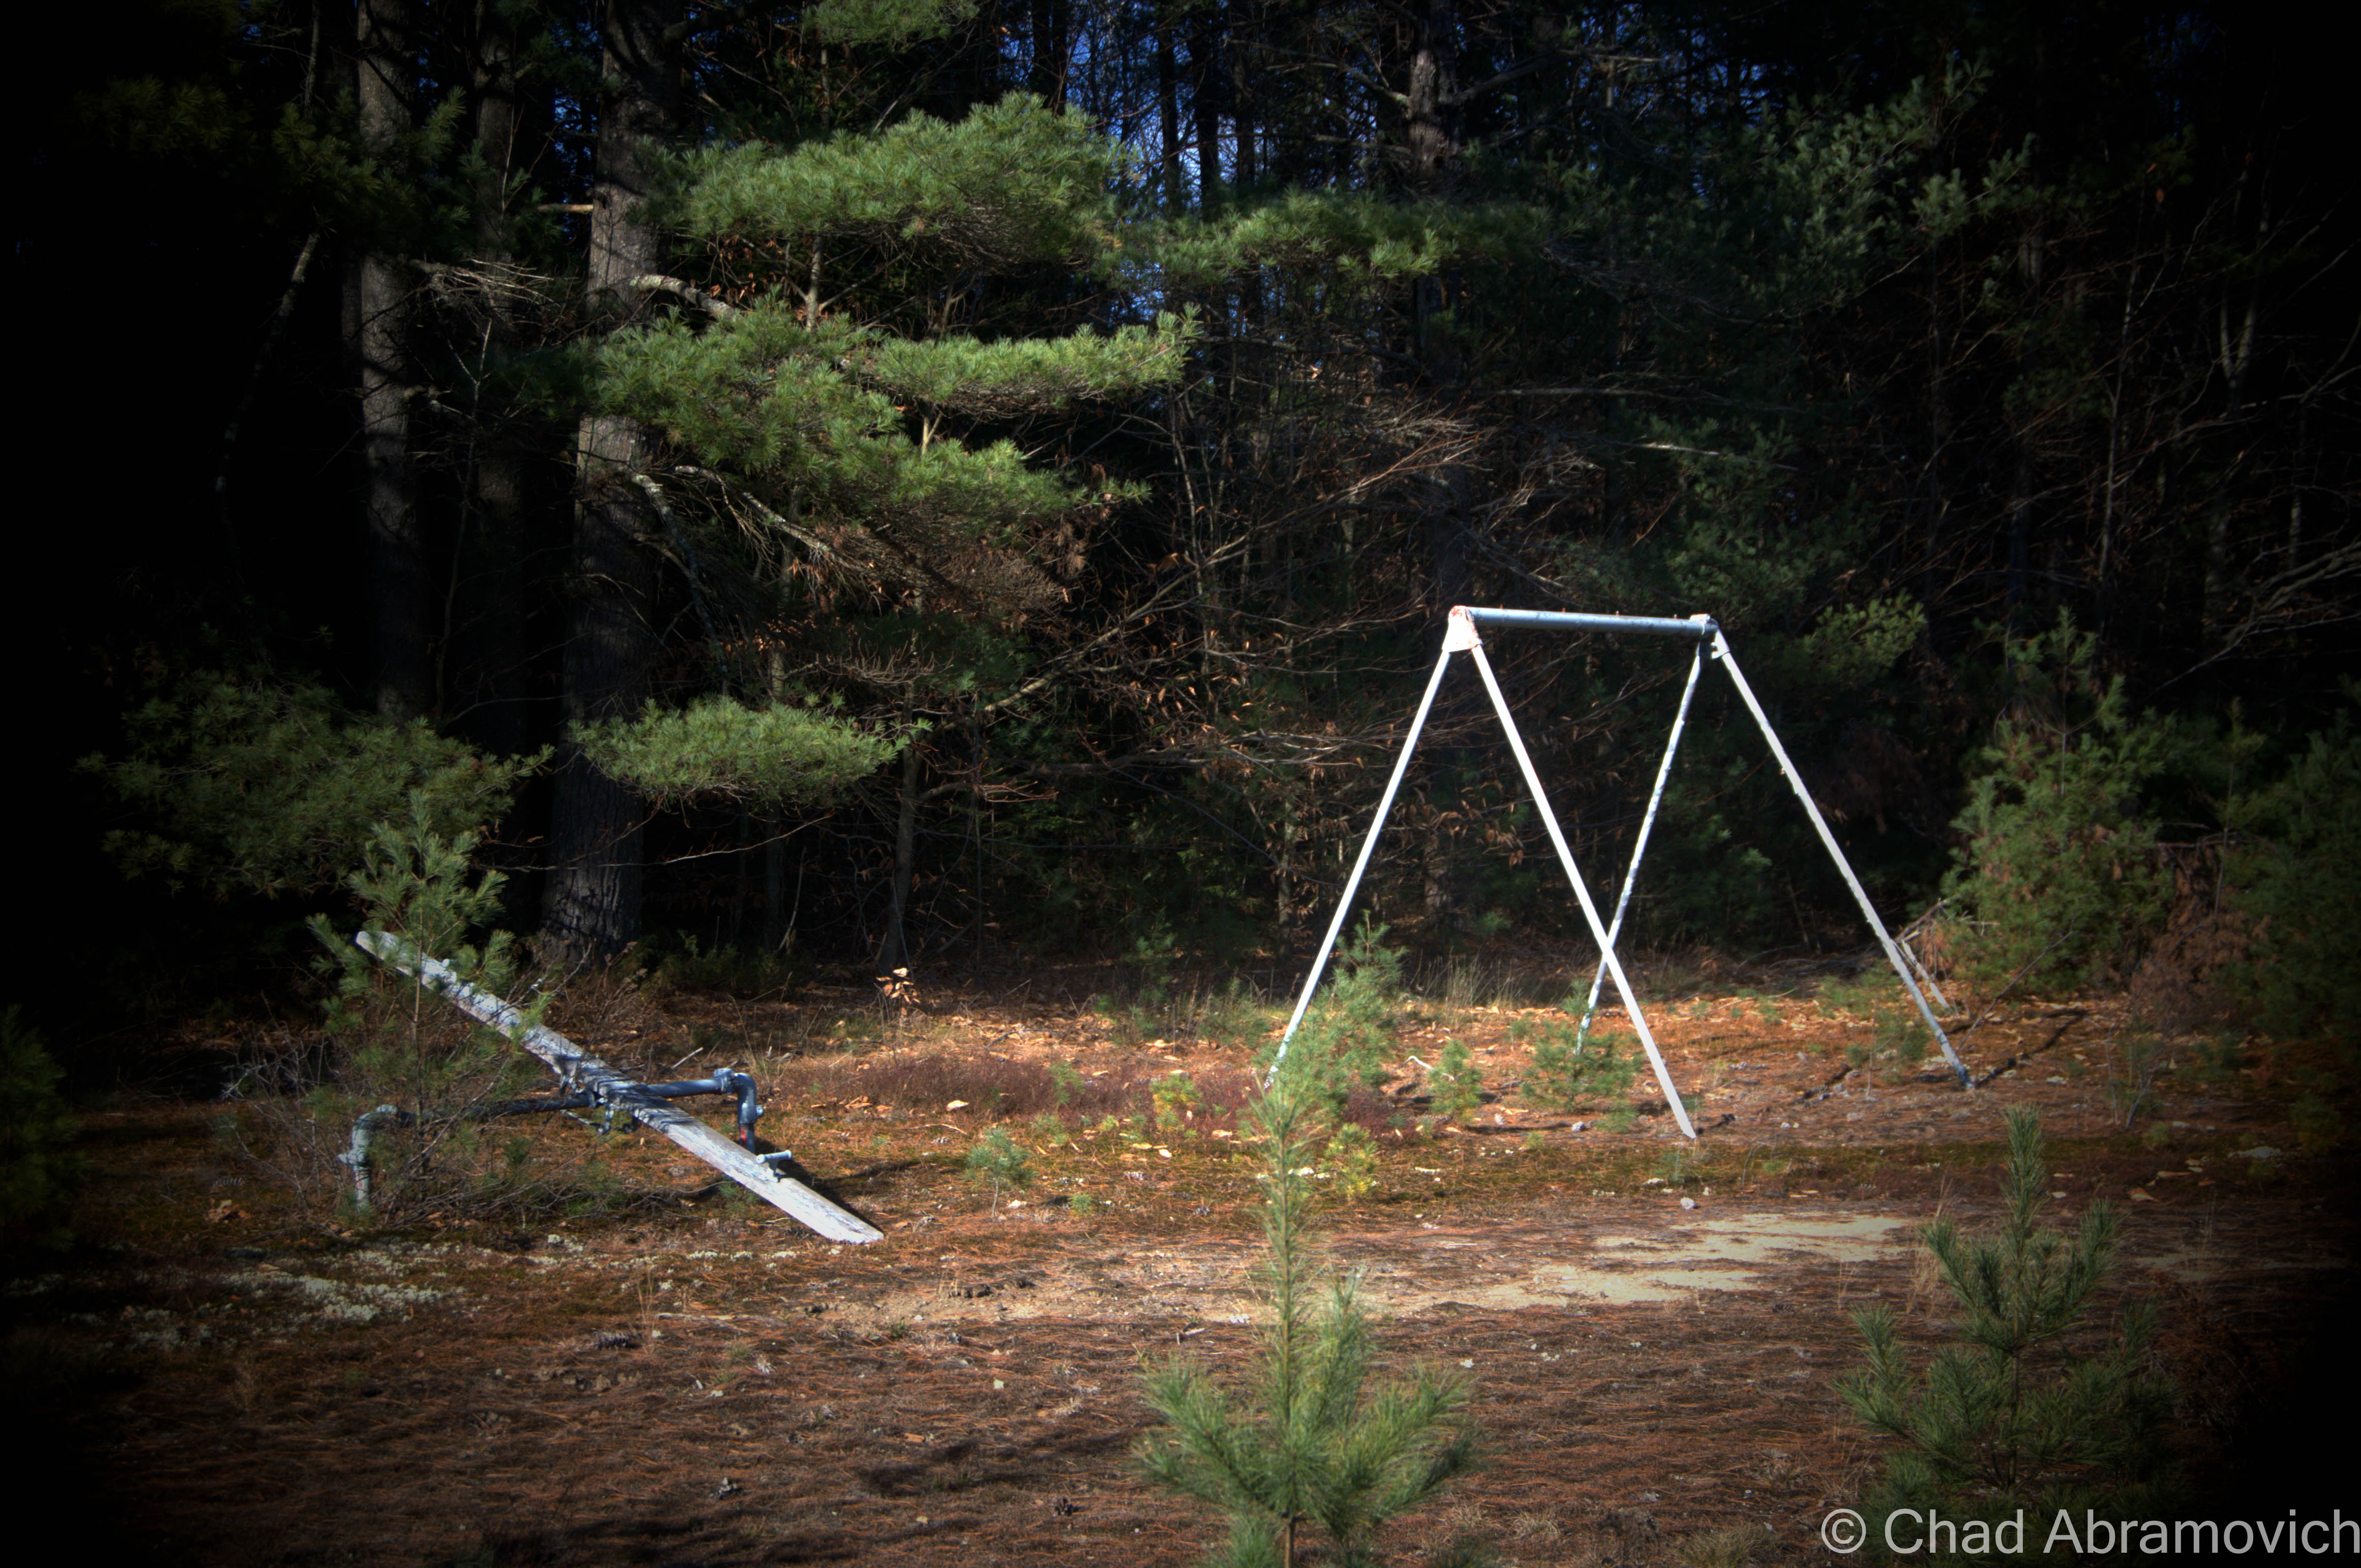 An abandoned playground weighed down by the desolation of the forest.